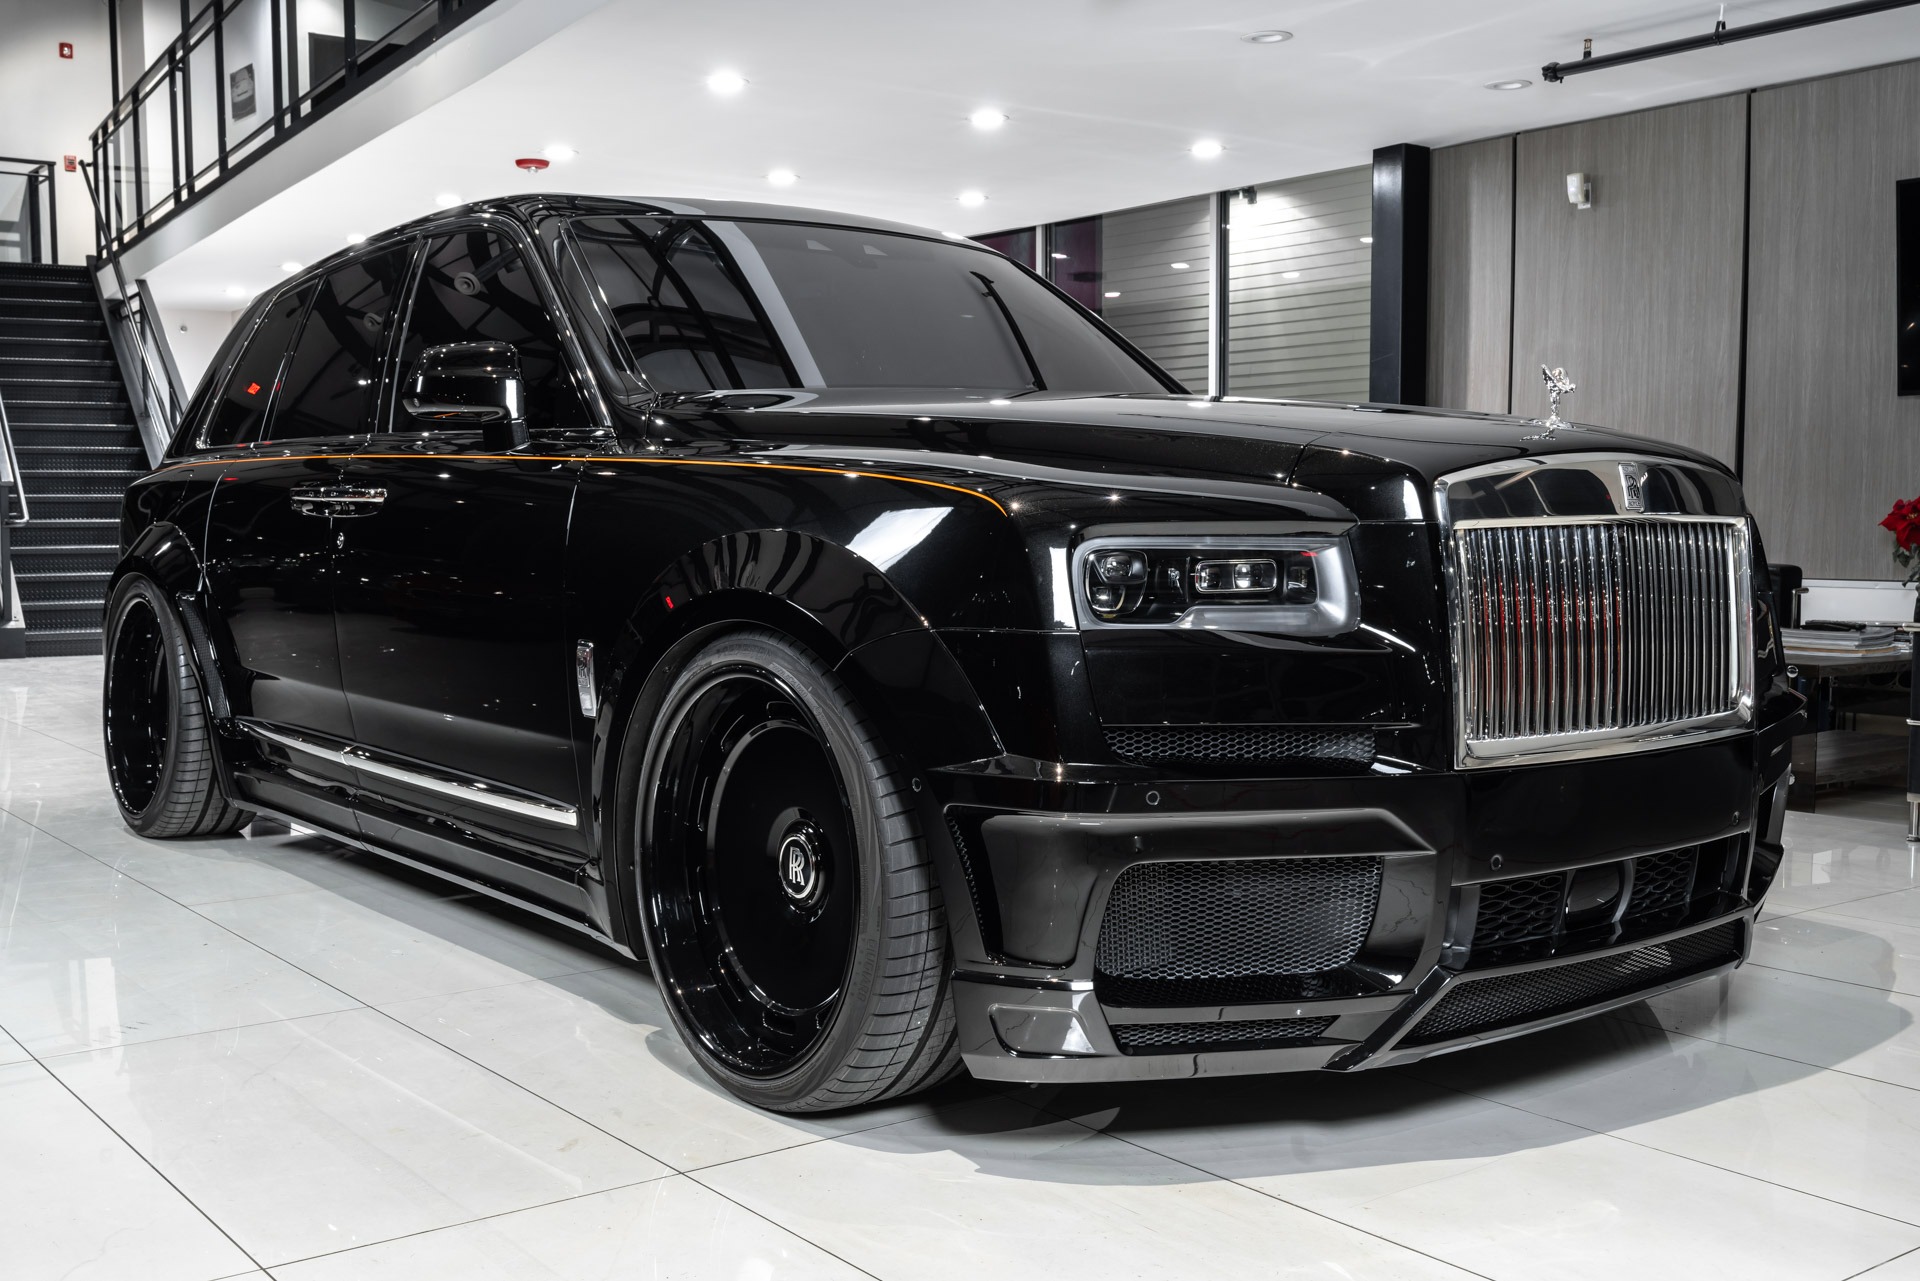 Rolls-Royce races to catch up to demand for Cullinan SUV